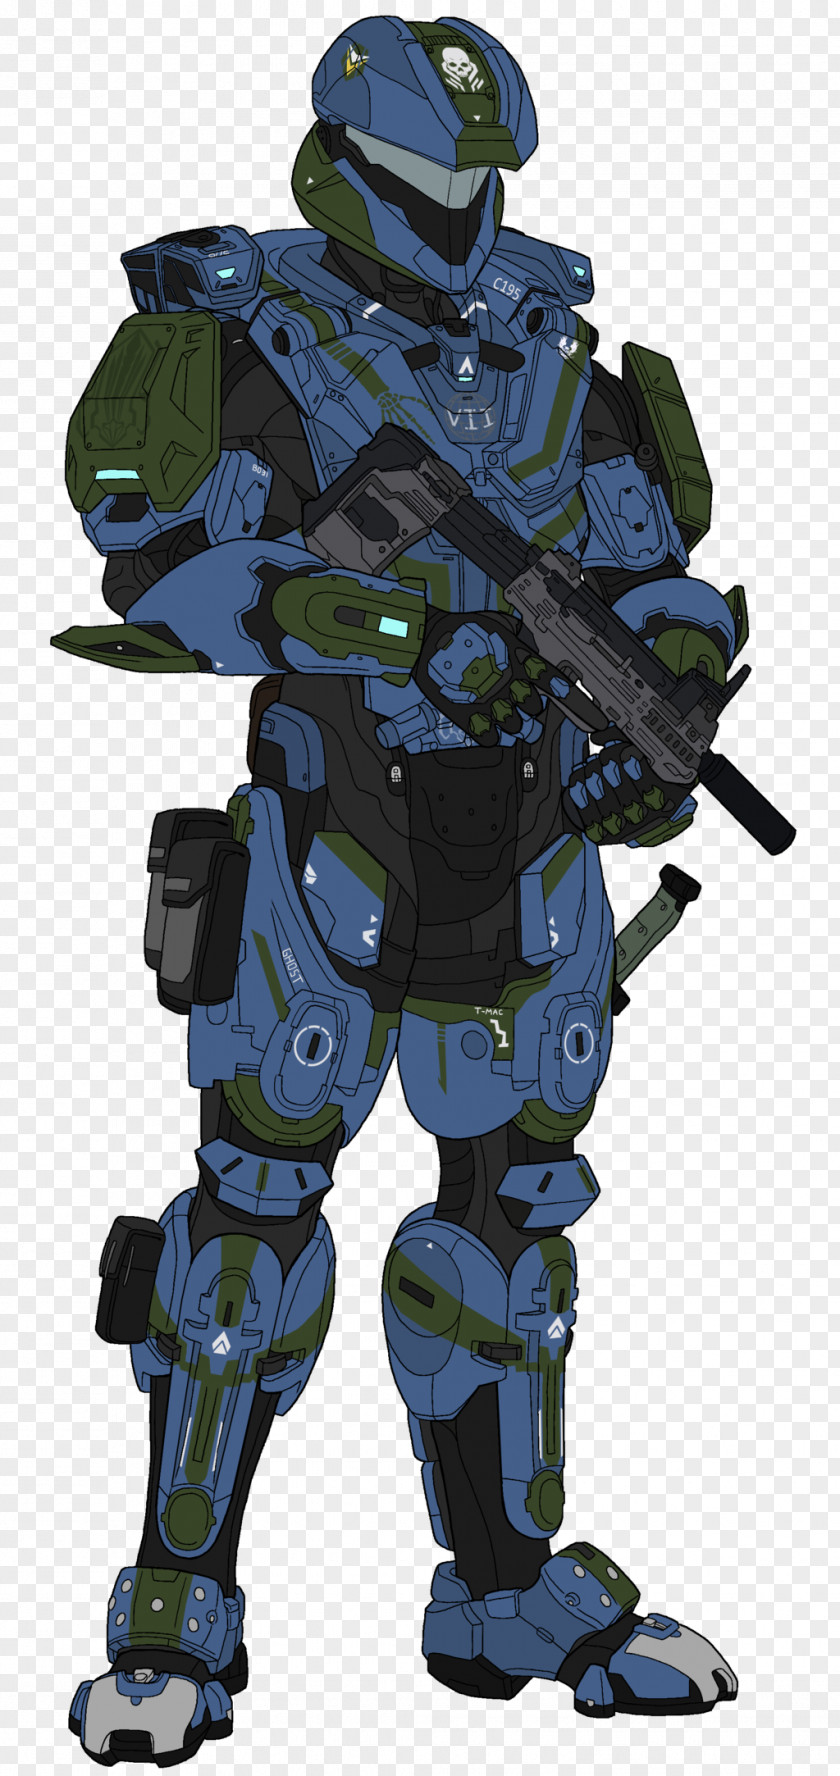 Halo Wars Halo: Combat Evolved Reach Spartan Assault 2 3 PNG